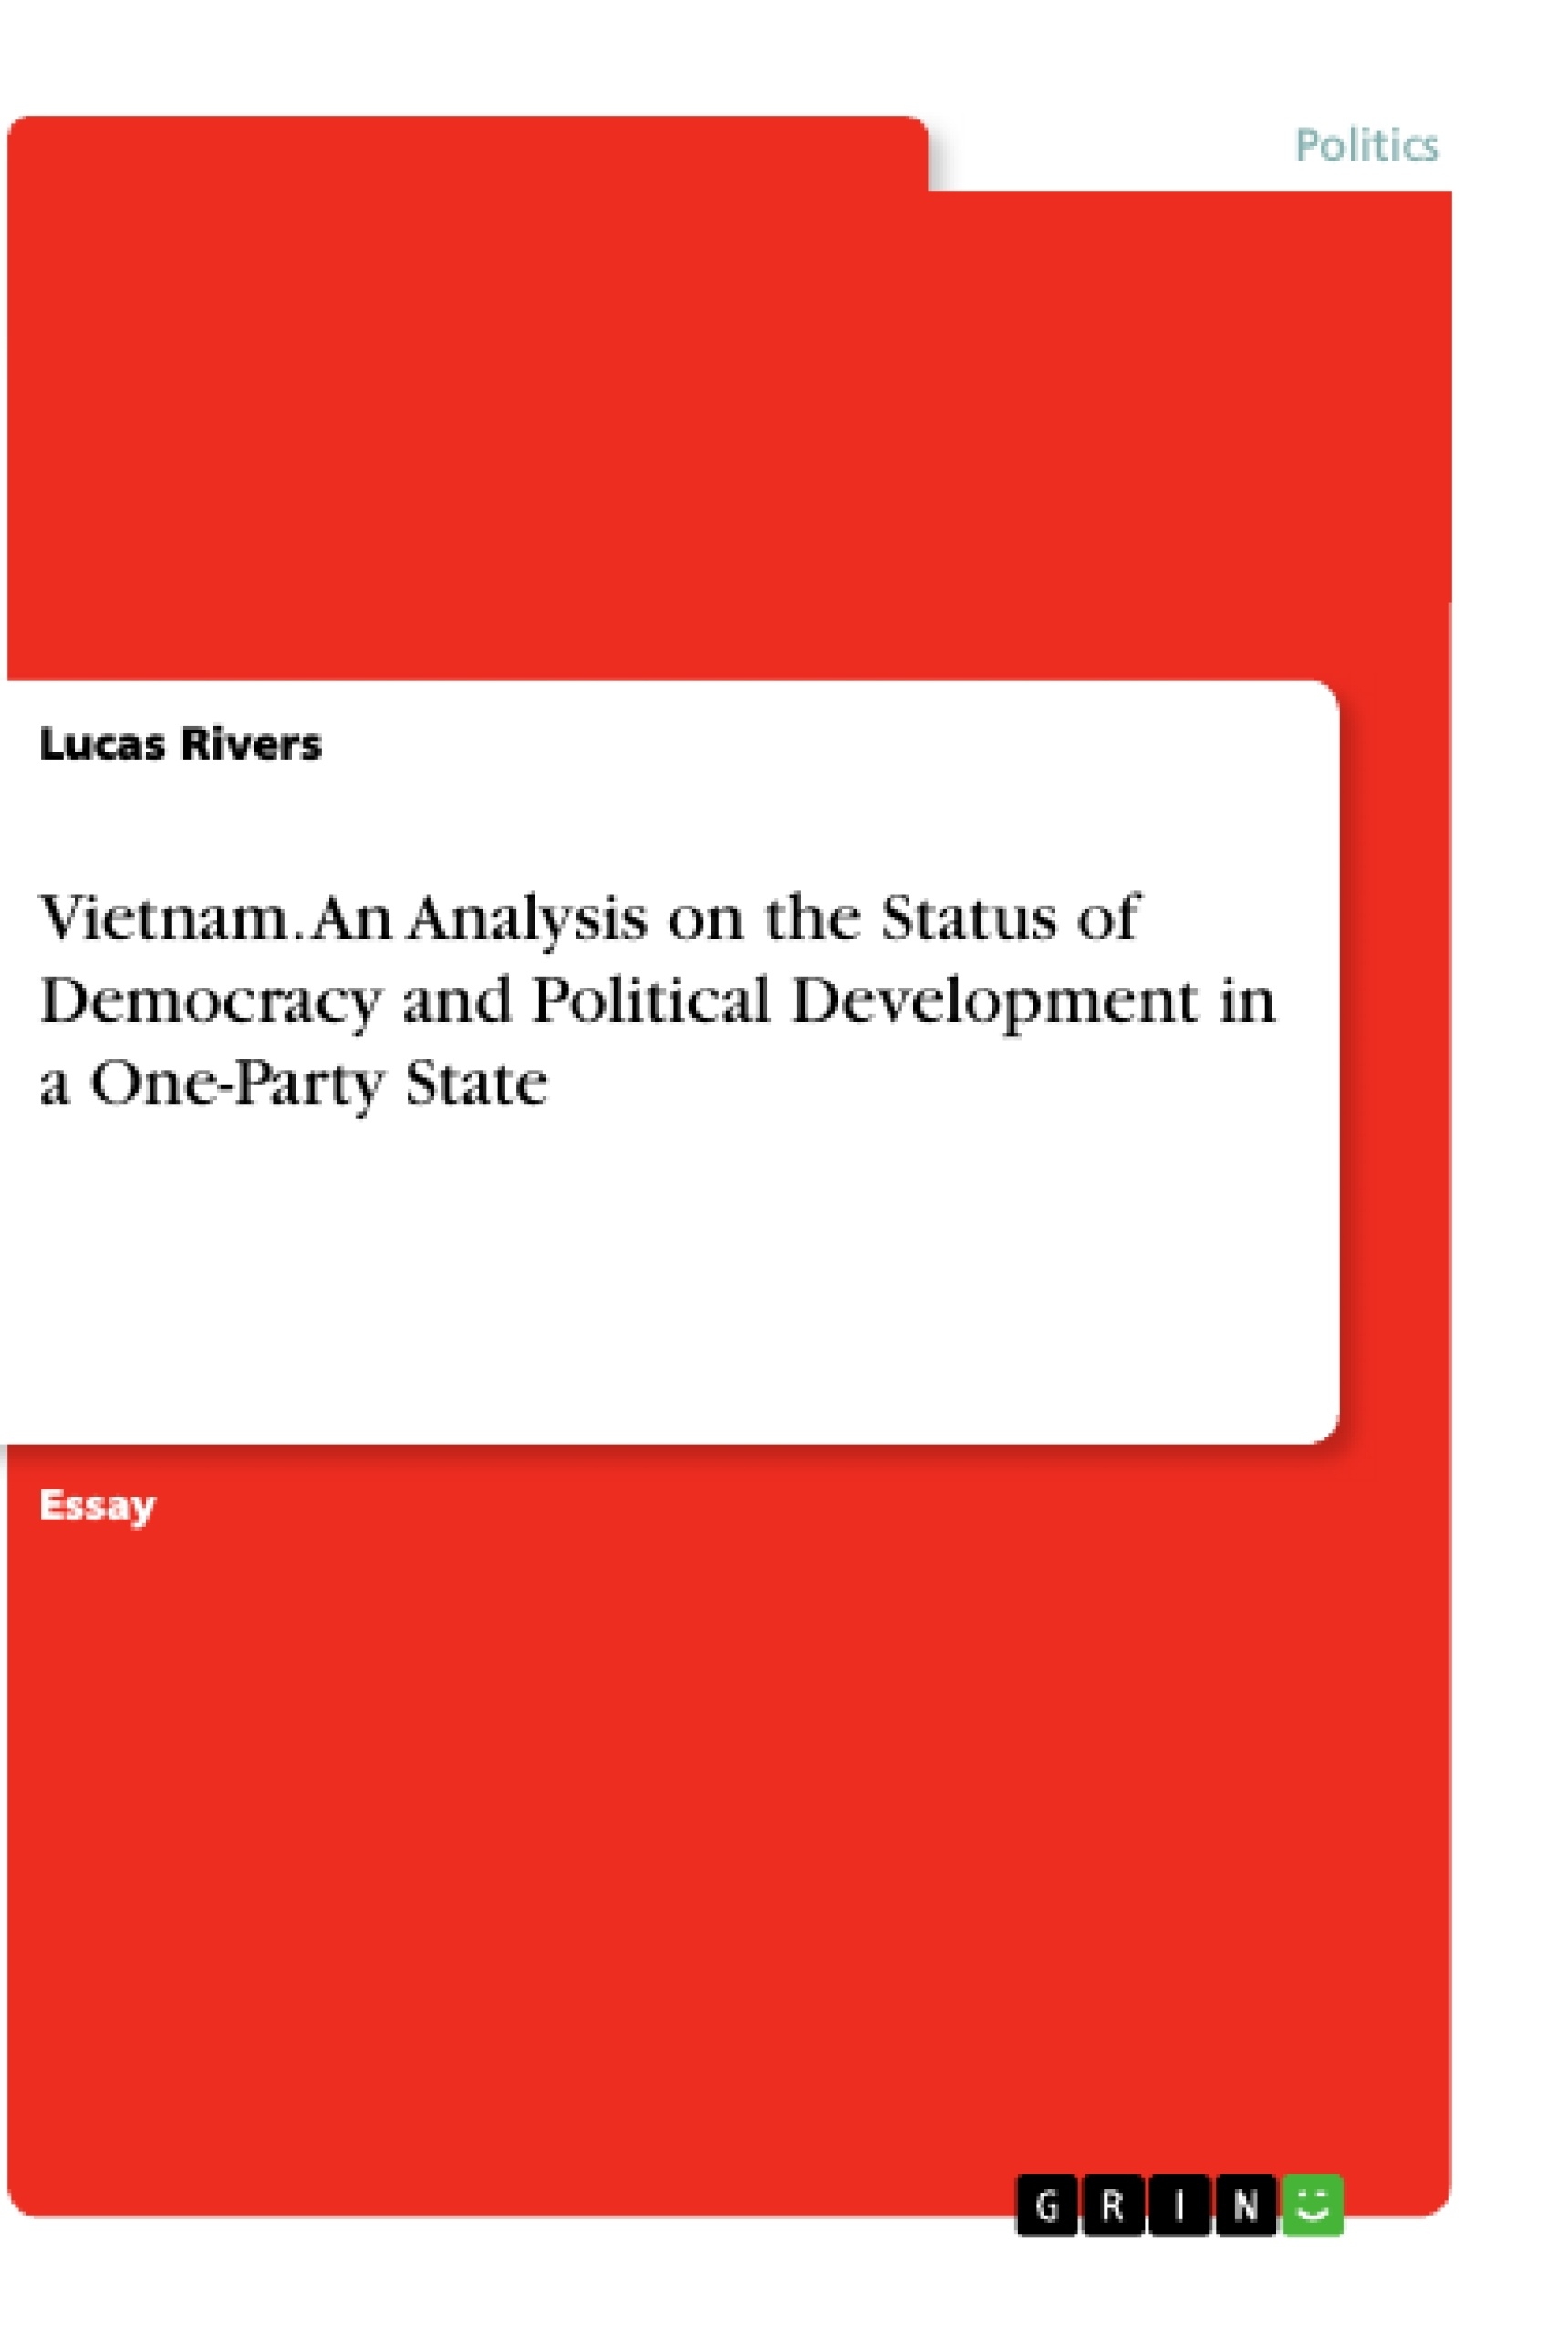 Título: Vietnam. An Analysis on the Status of Democracy and Political Development in a One-Party State